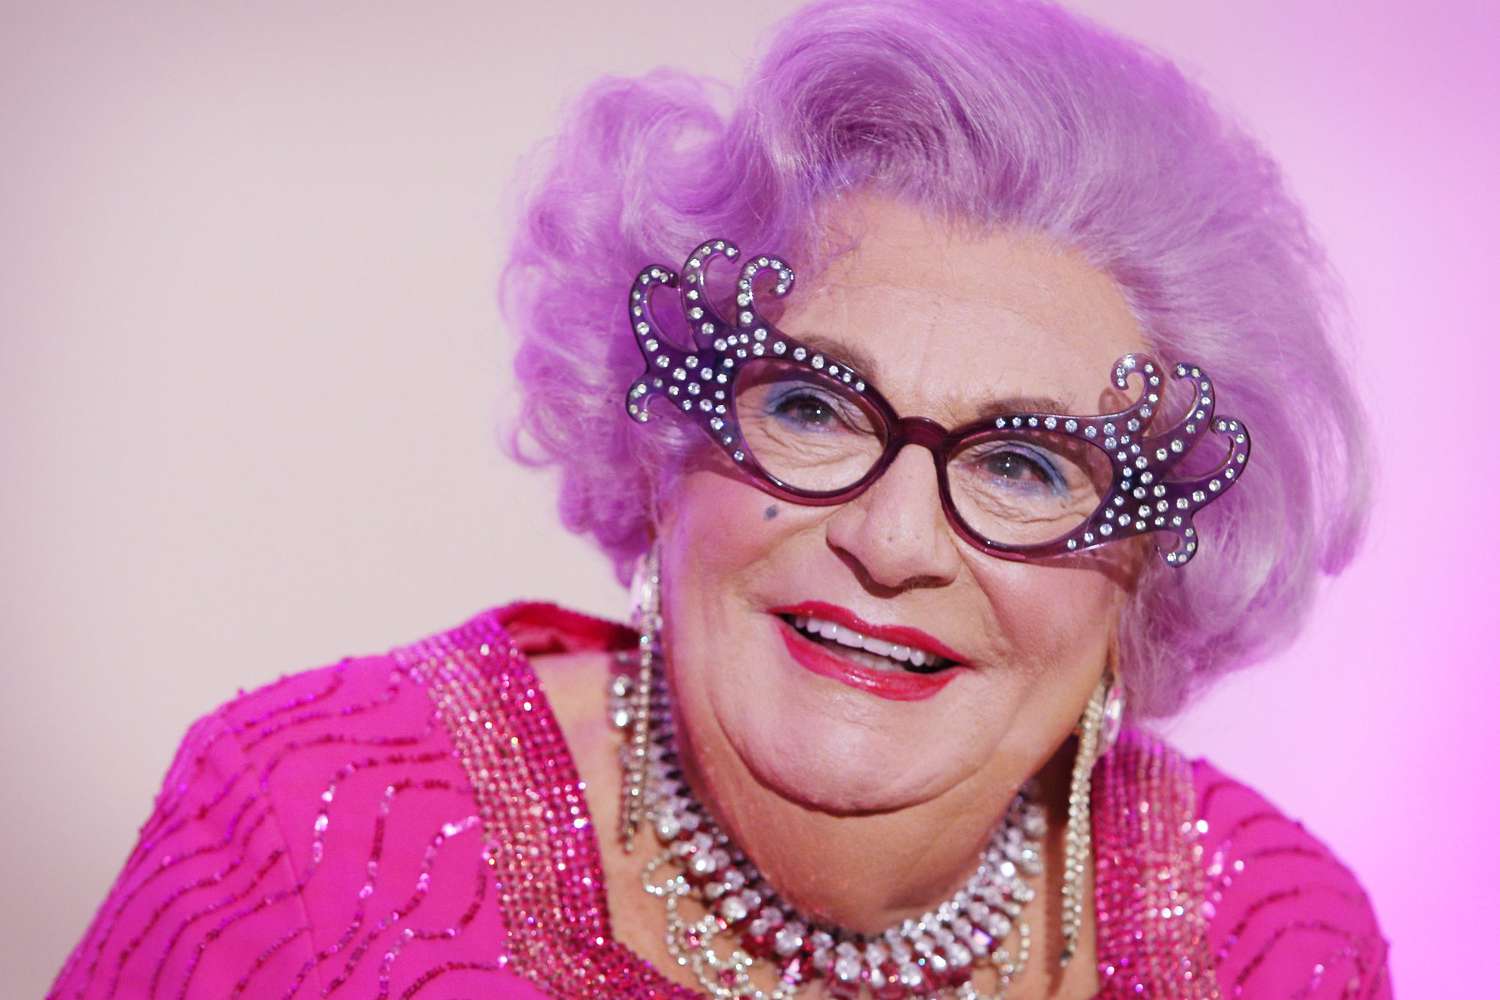 SYDNEY, AUSTRALIA - SEPTEMBER 11: Dame Edna Everage hosts high tea ahead of her My Gorgeous Life national tour on September 11, 2019 in Sydney, Australia. (Photo by Lisa Maree Williams/Getty Images)